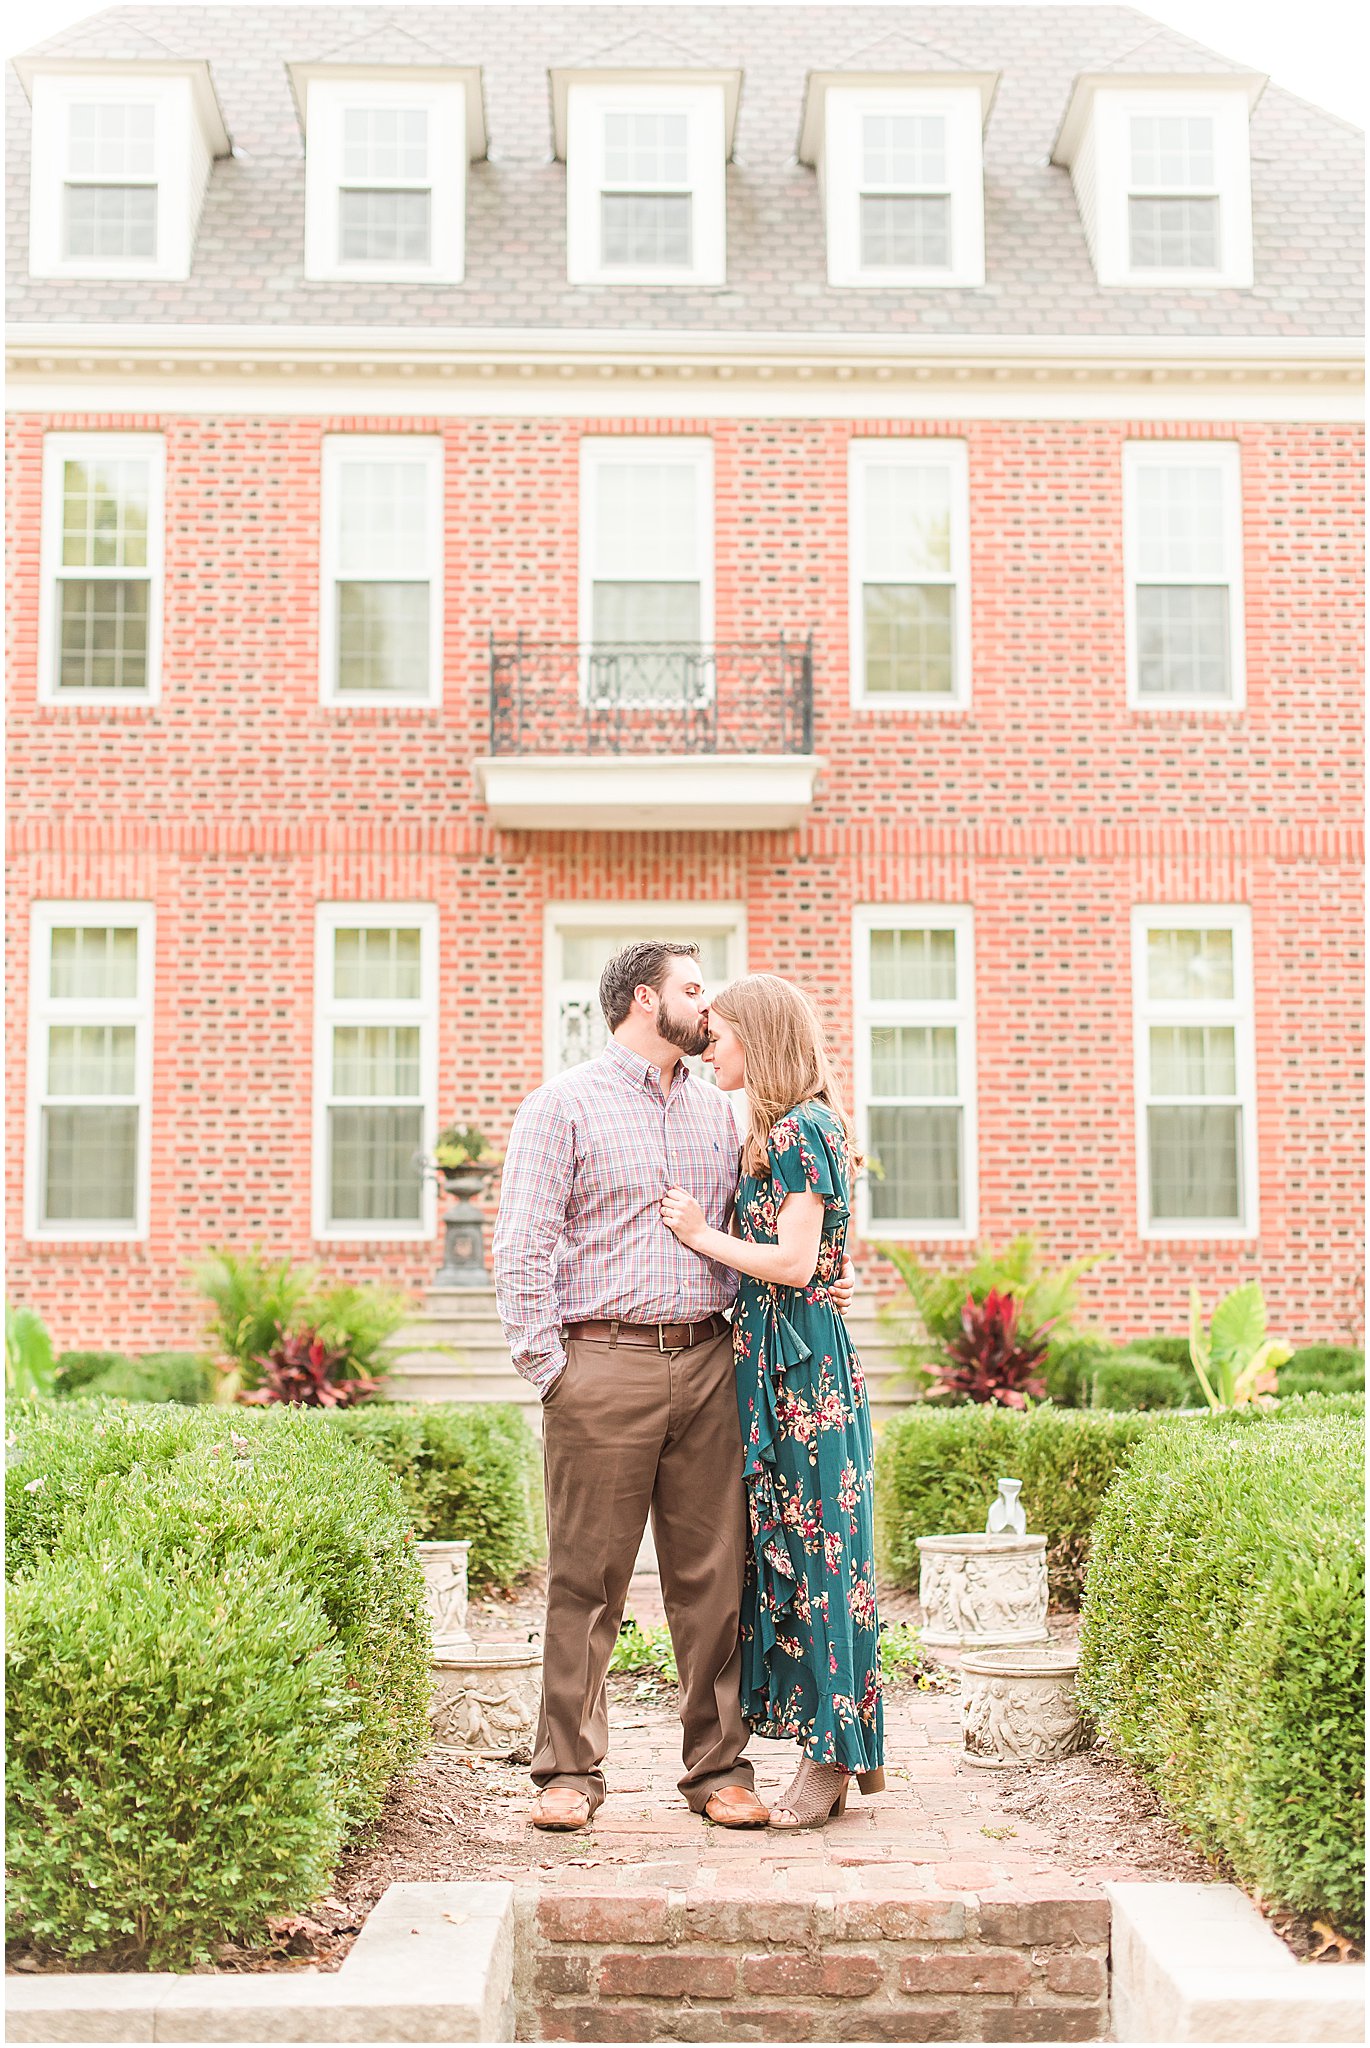 Groom kissing bride's forehead during Coxhall Gardens engagement session